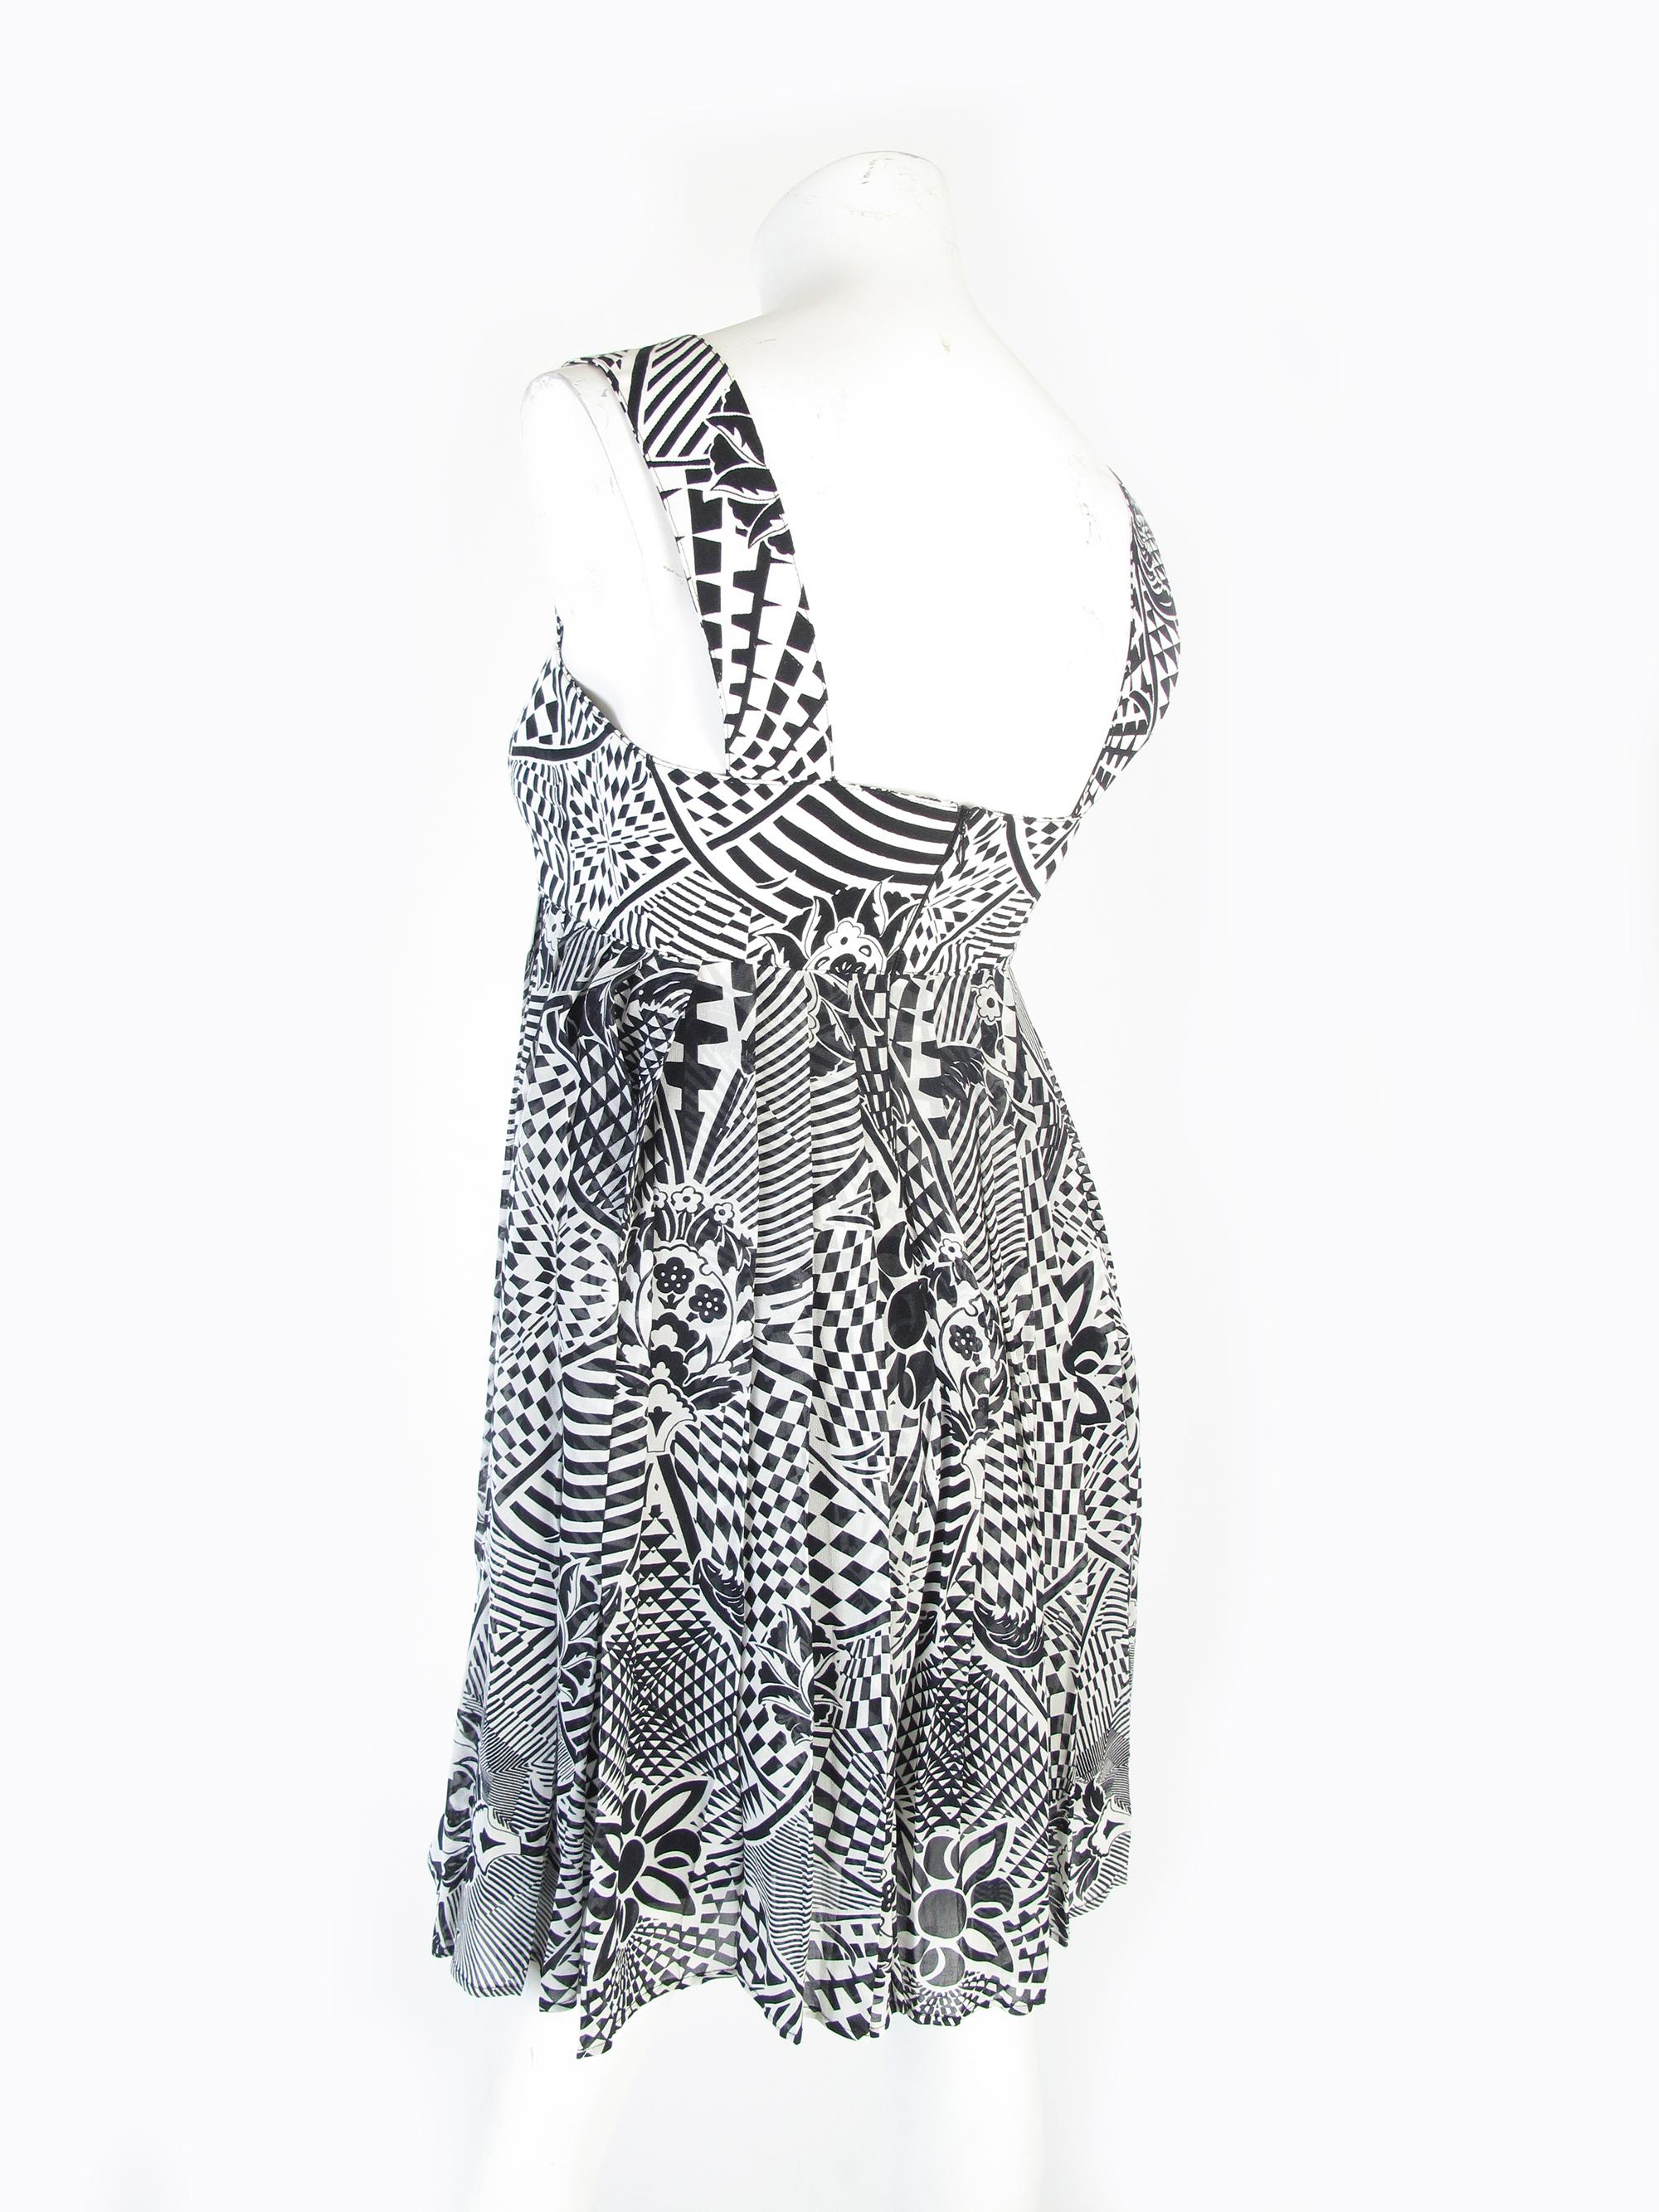 1990s Versus by Gianni Versace black and white silk baby doll dress. Size 4-6
Condition: Excellent. 